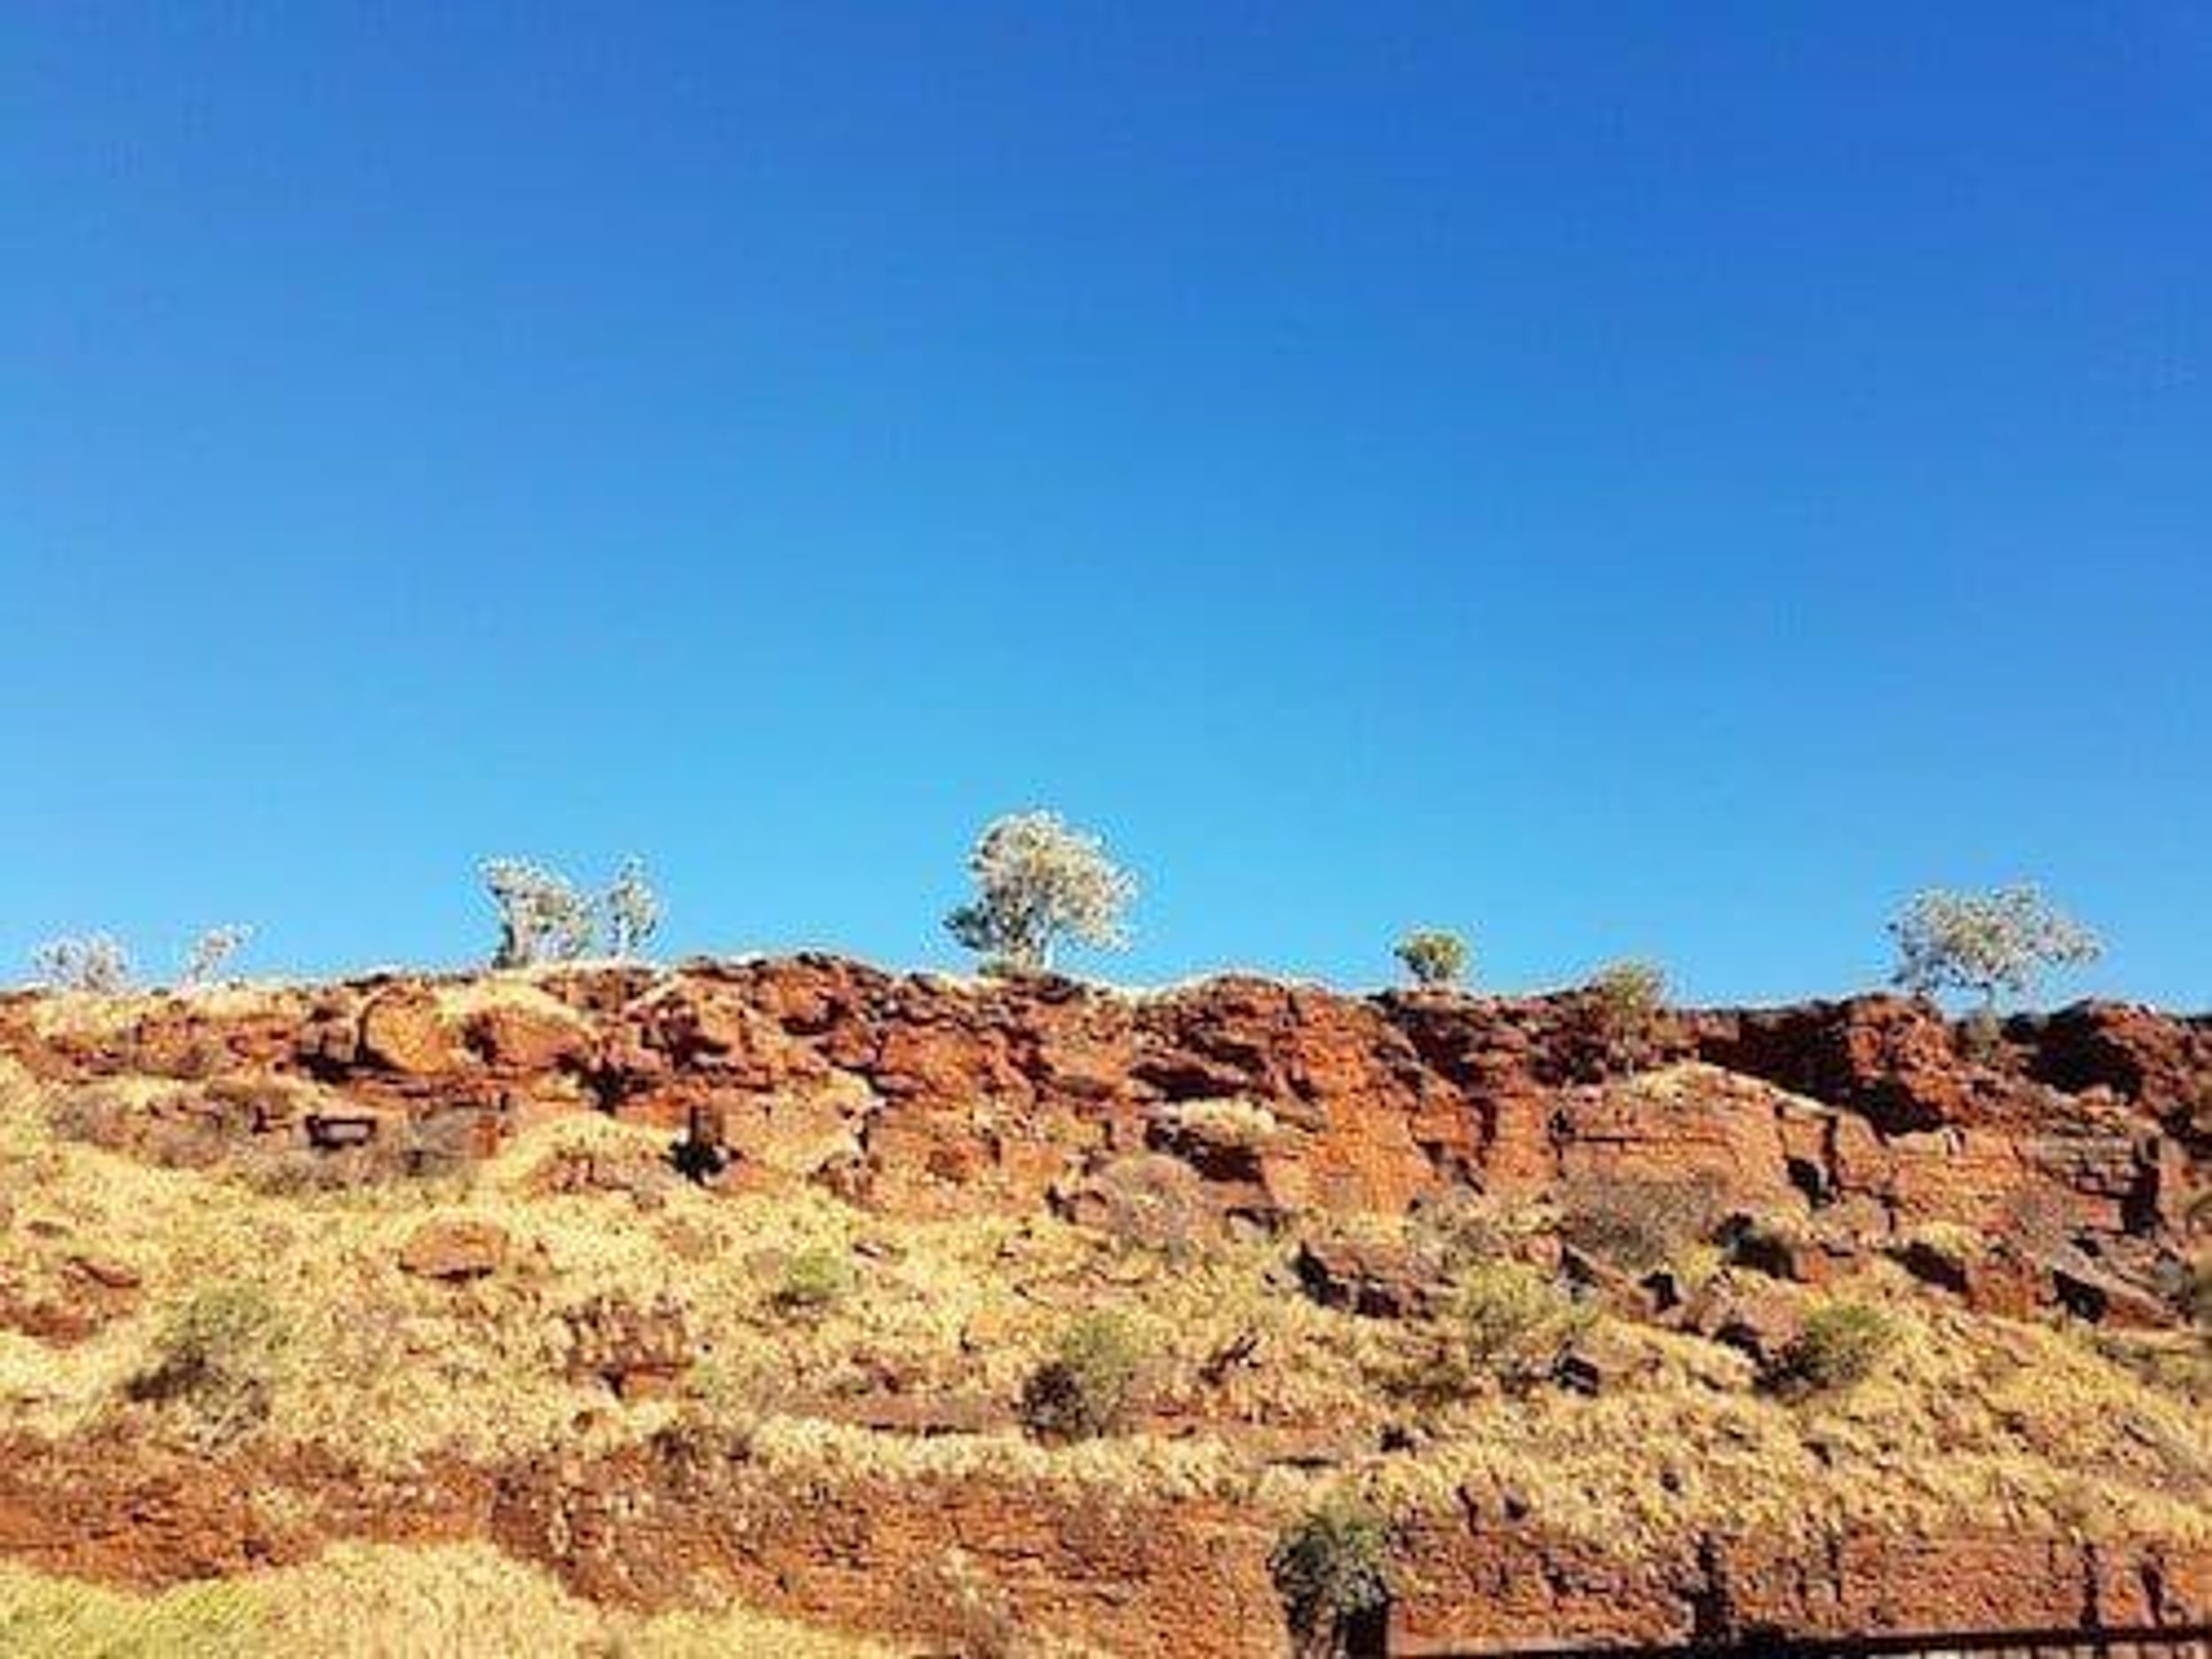 MinRes and Brockman Form JV for Marillana Iron Ore Project